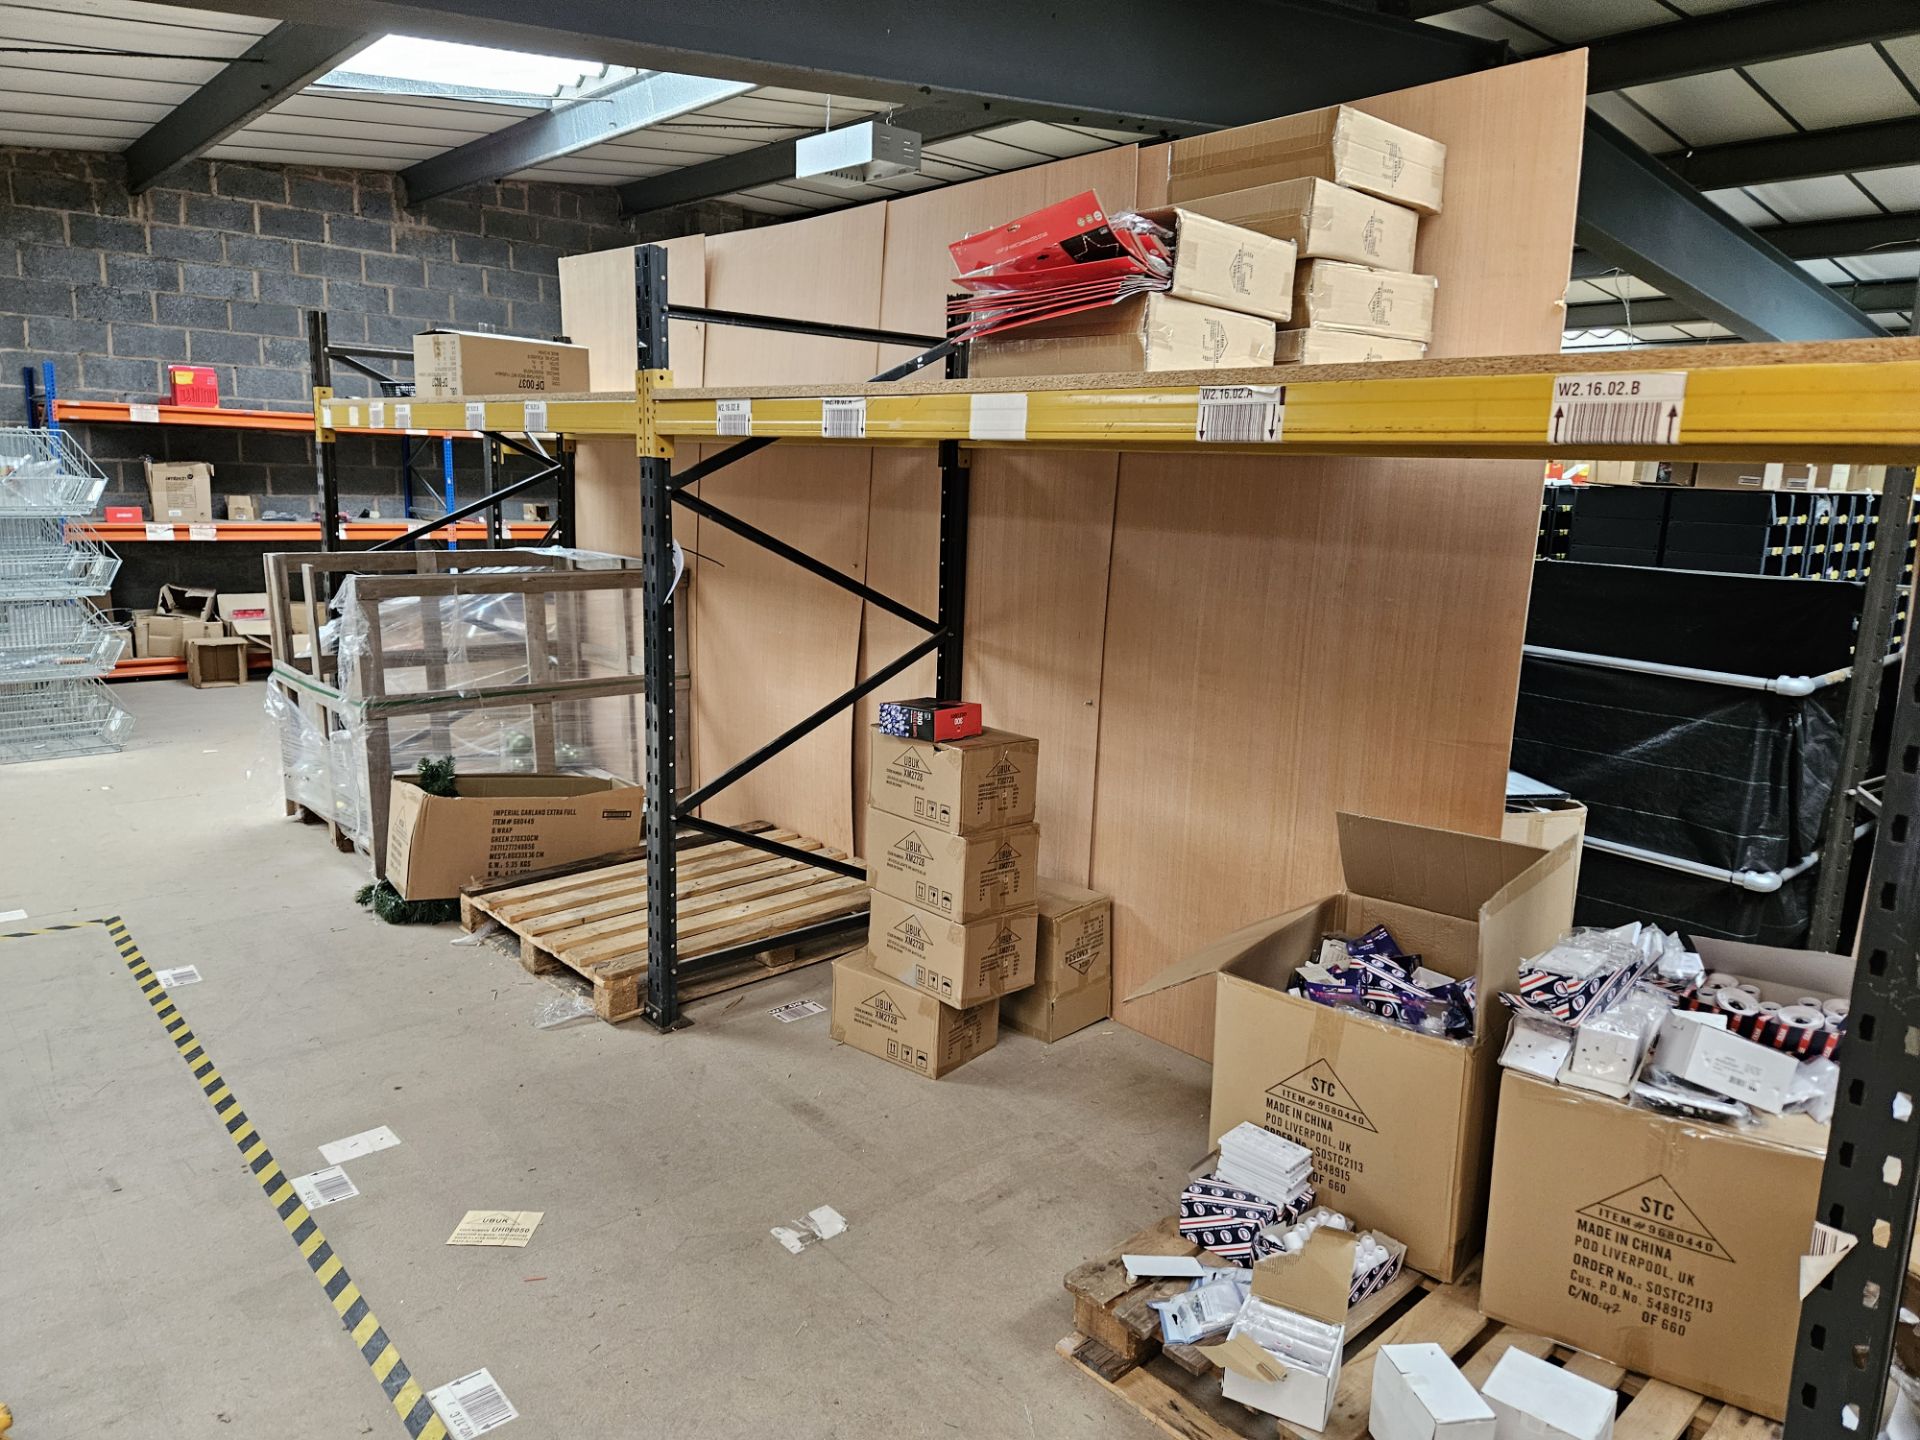 2 x bays heavy duty racking including assorted contents.